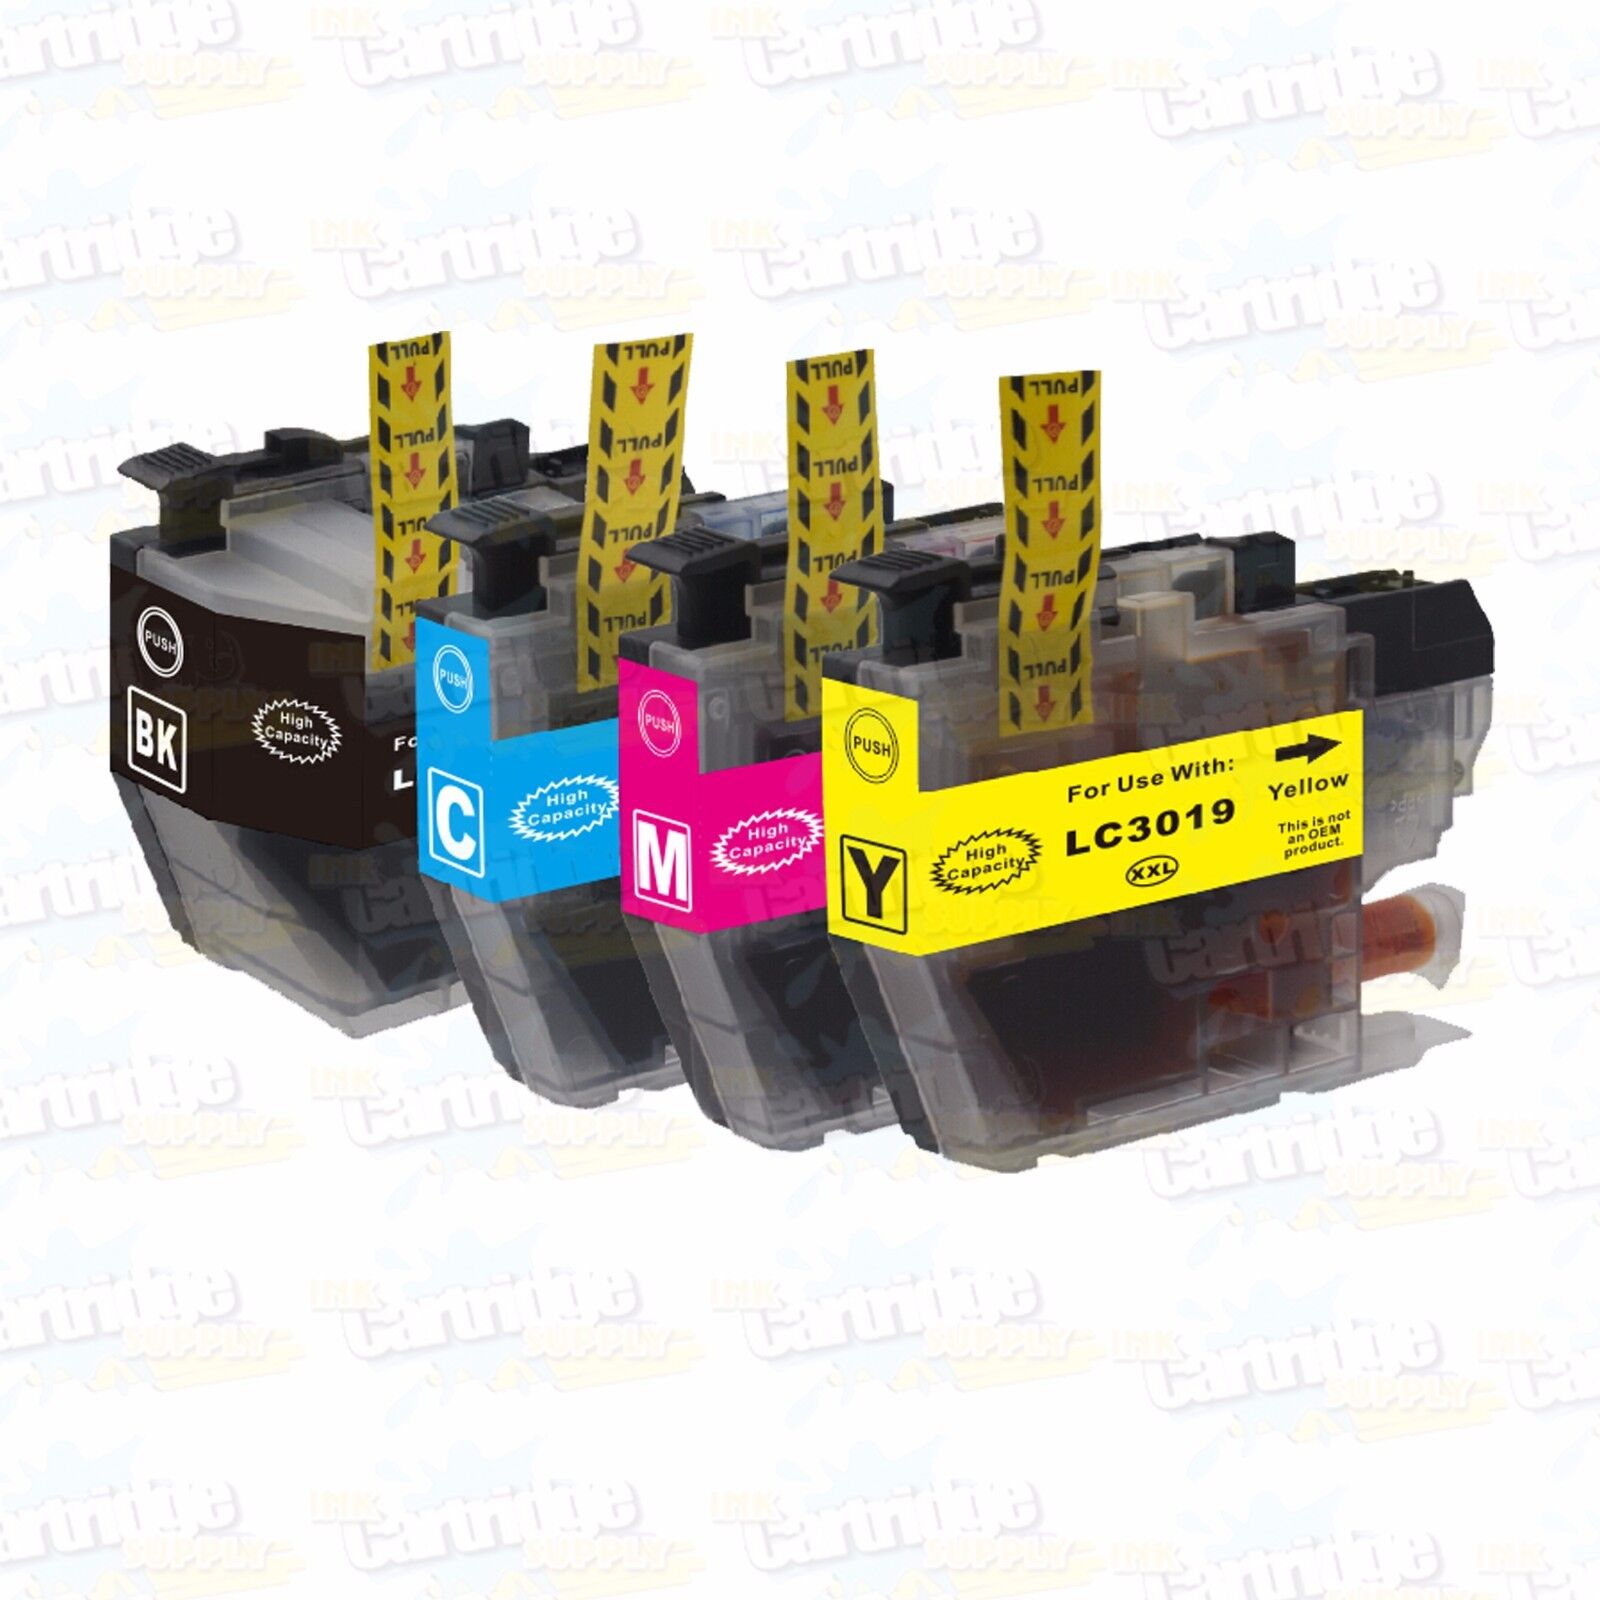 4PK LC3019 Super High Yield Ink For Brother MFC-J5330DW MFC-J6530DW MFC-J6930DW